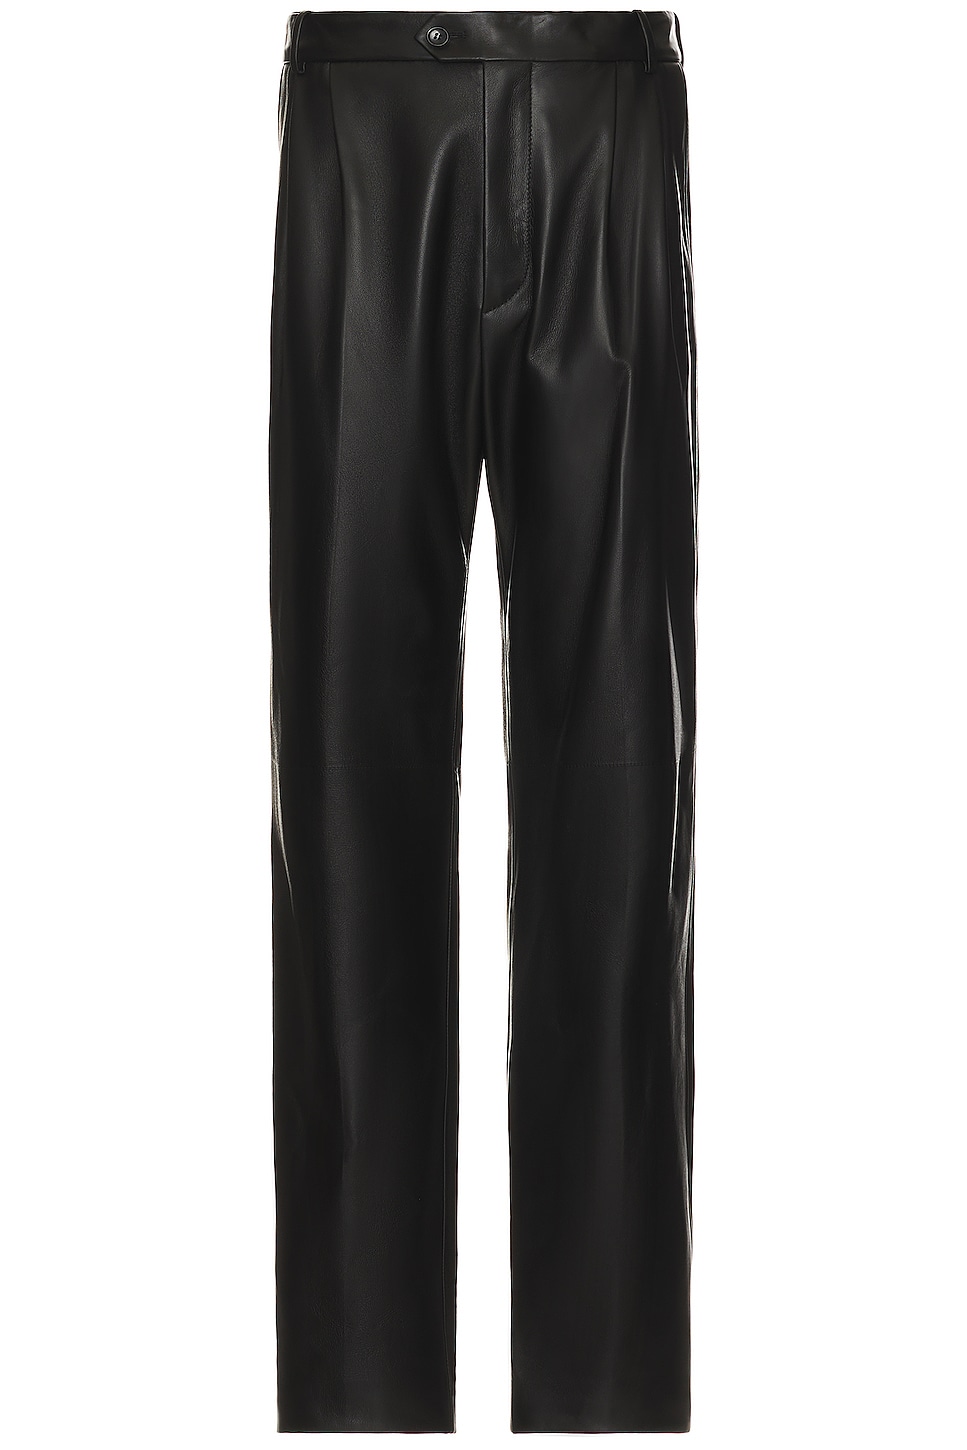 Image 1 of Bally Leather Trousers in Black